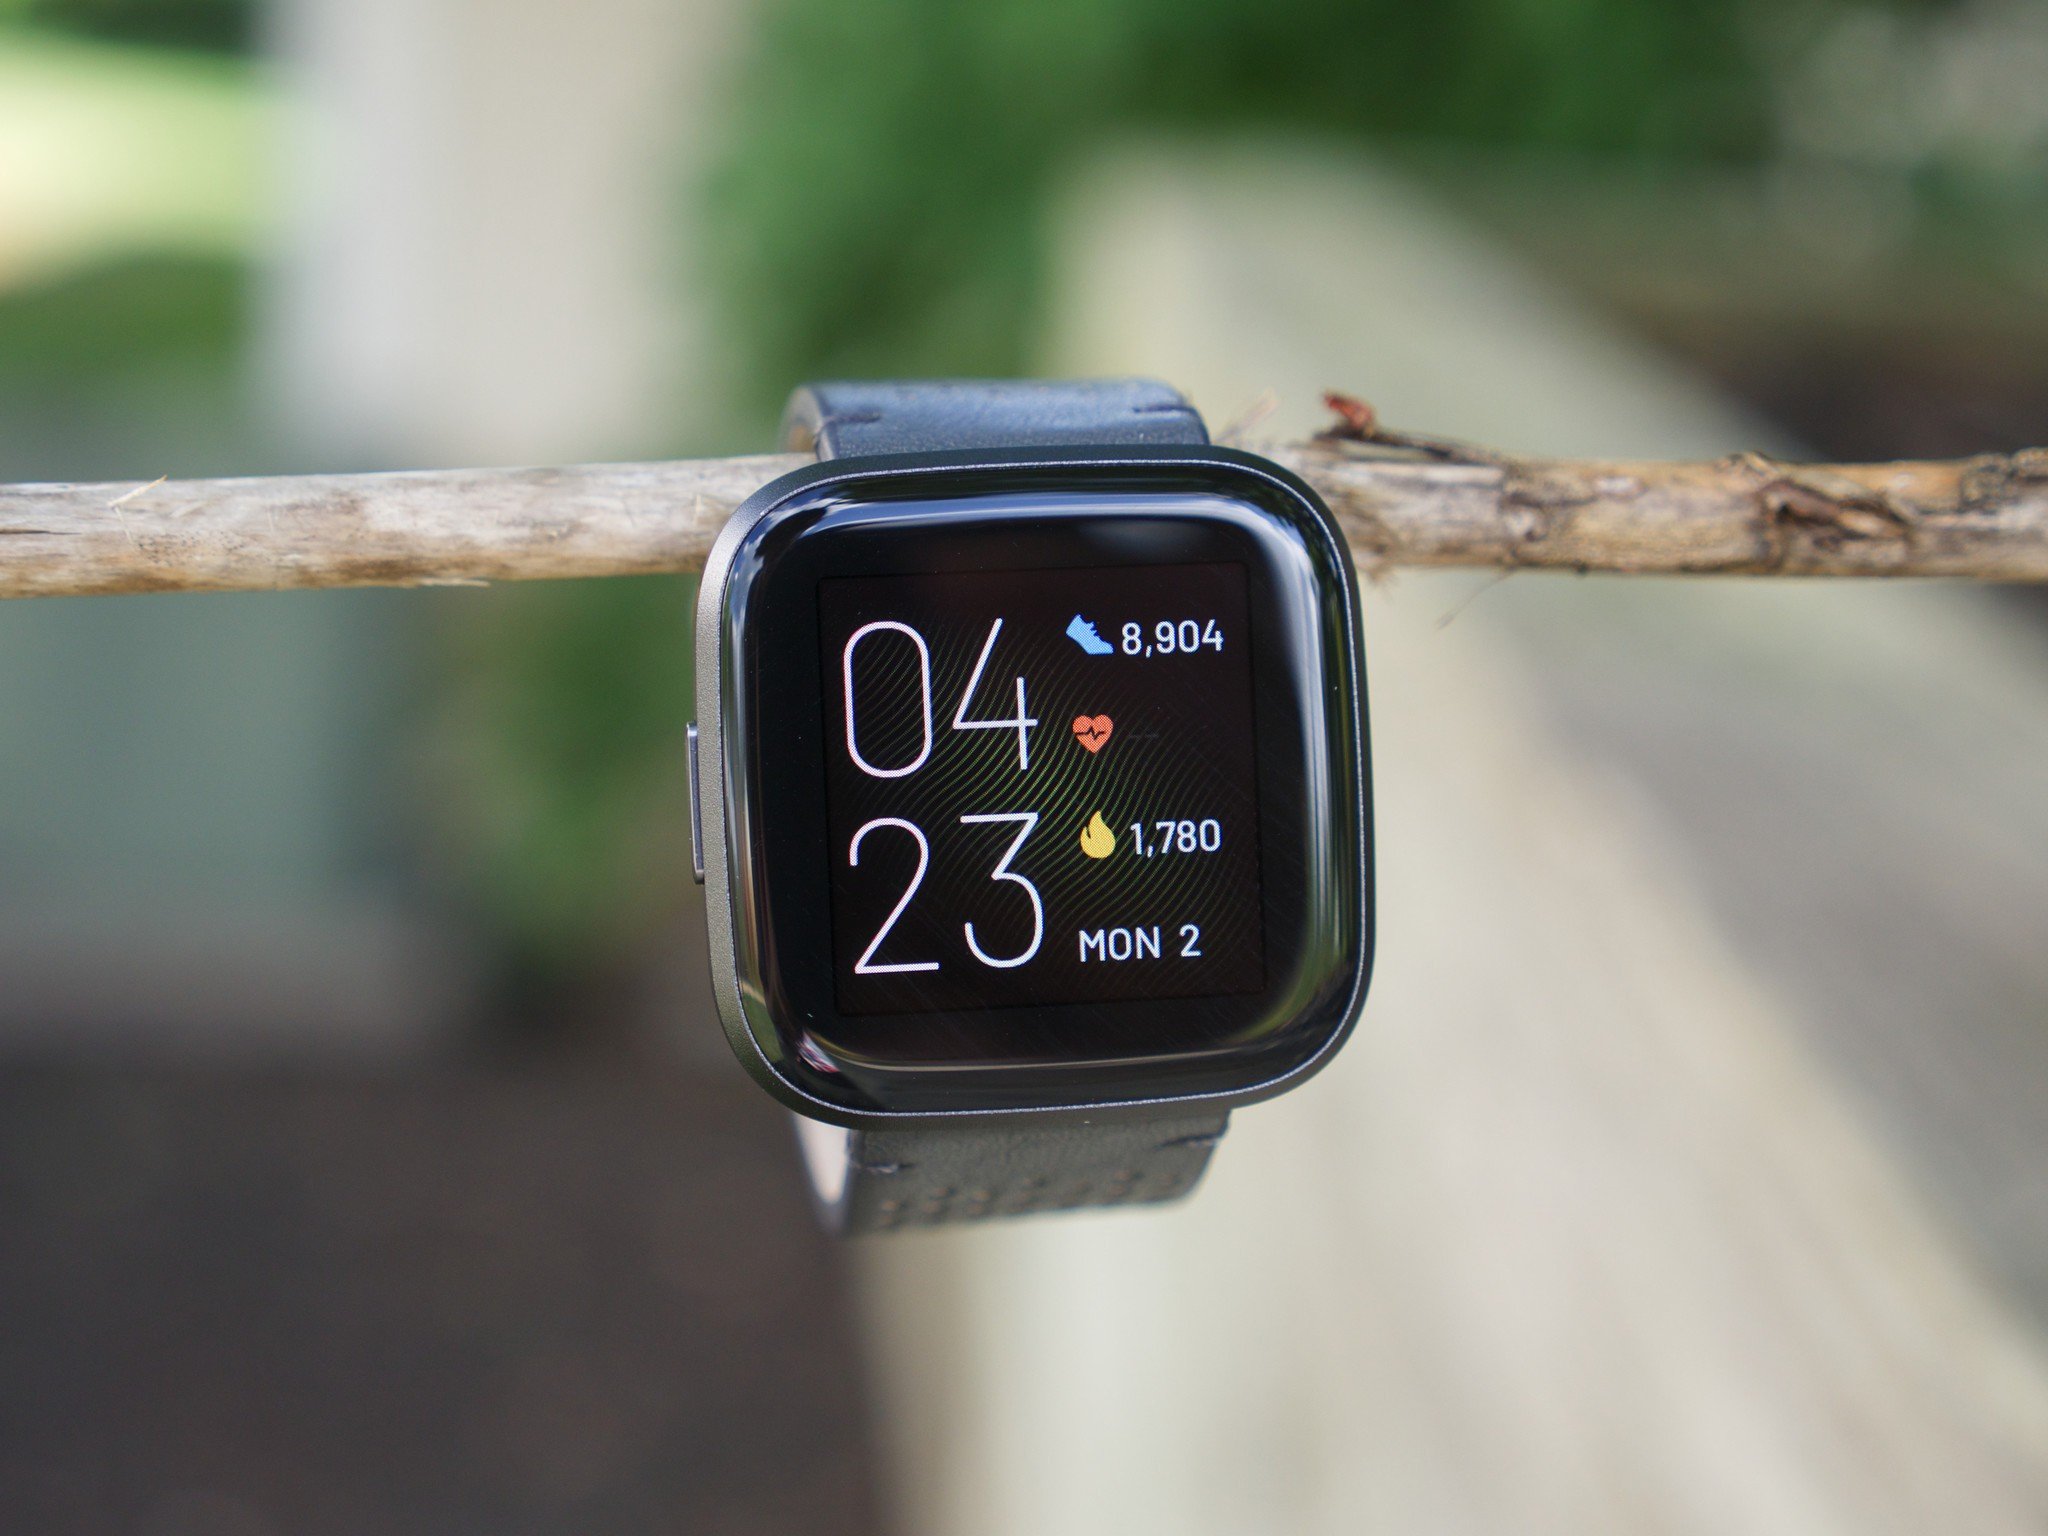 Fitbit Versa 2 vs. Apple Watch Series 3: Which should I buy? | Android ...